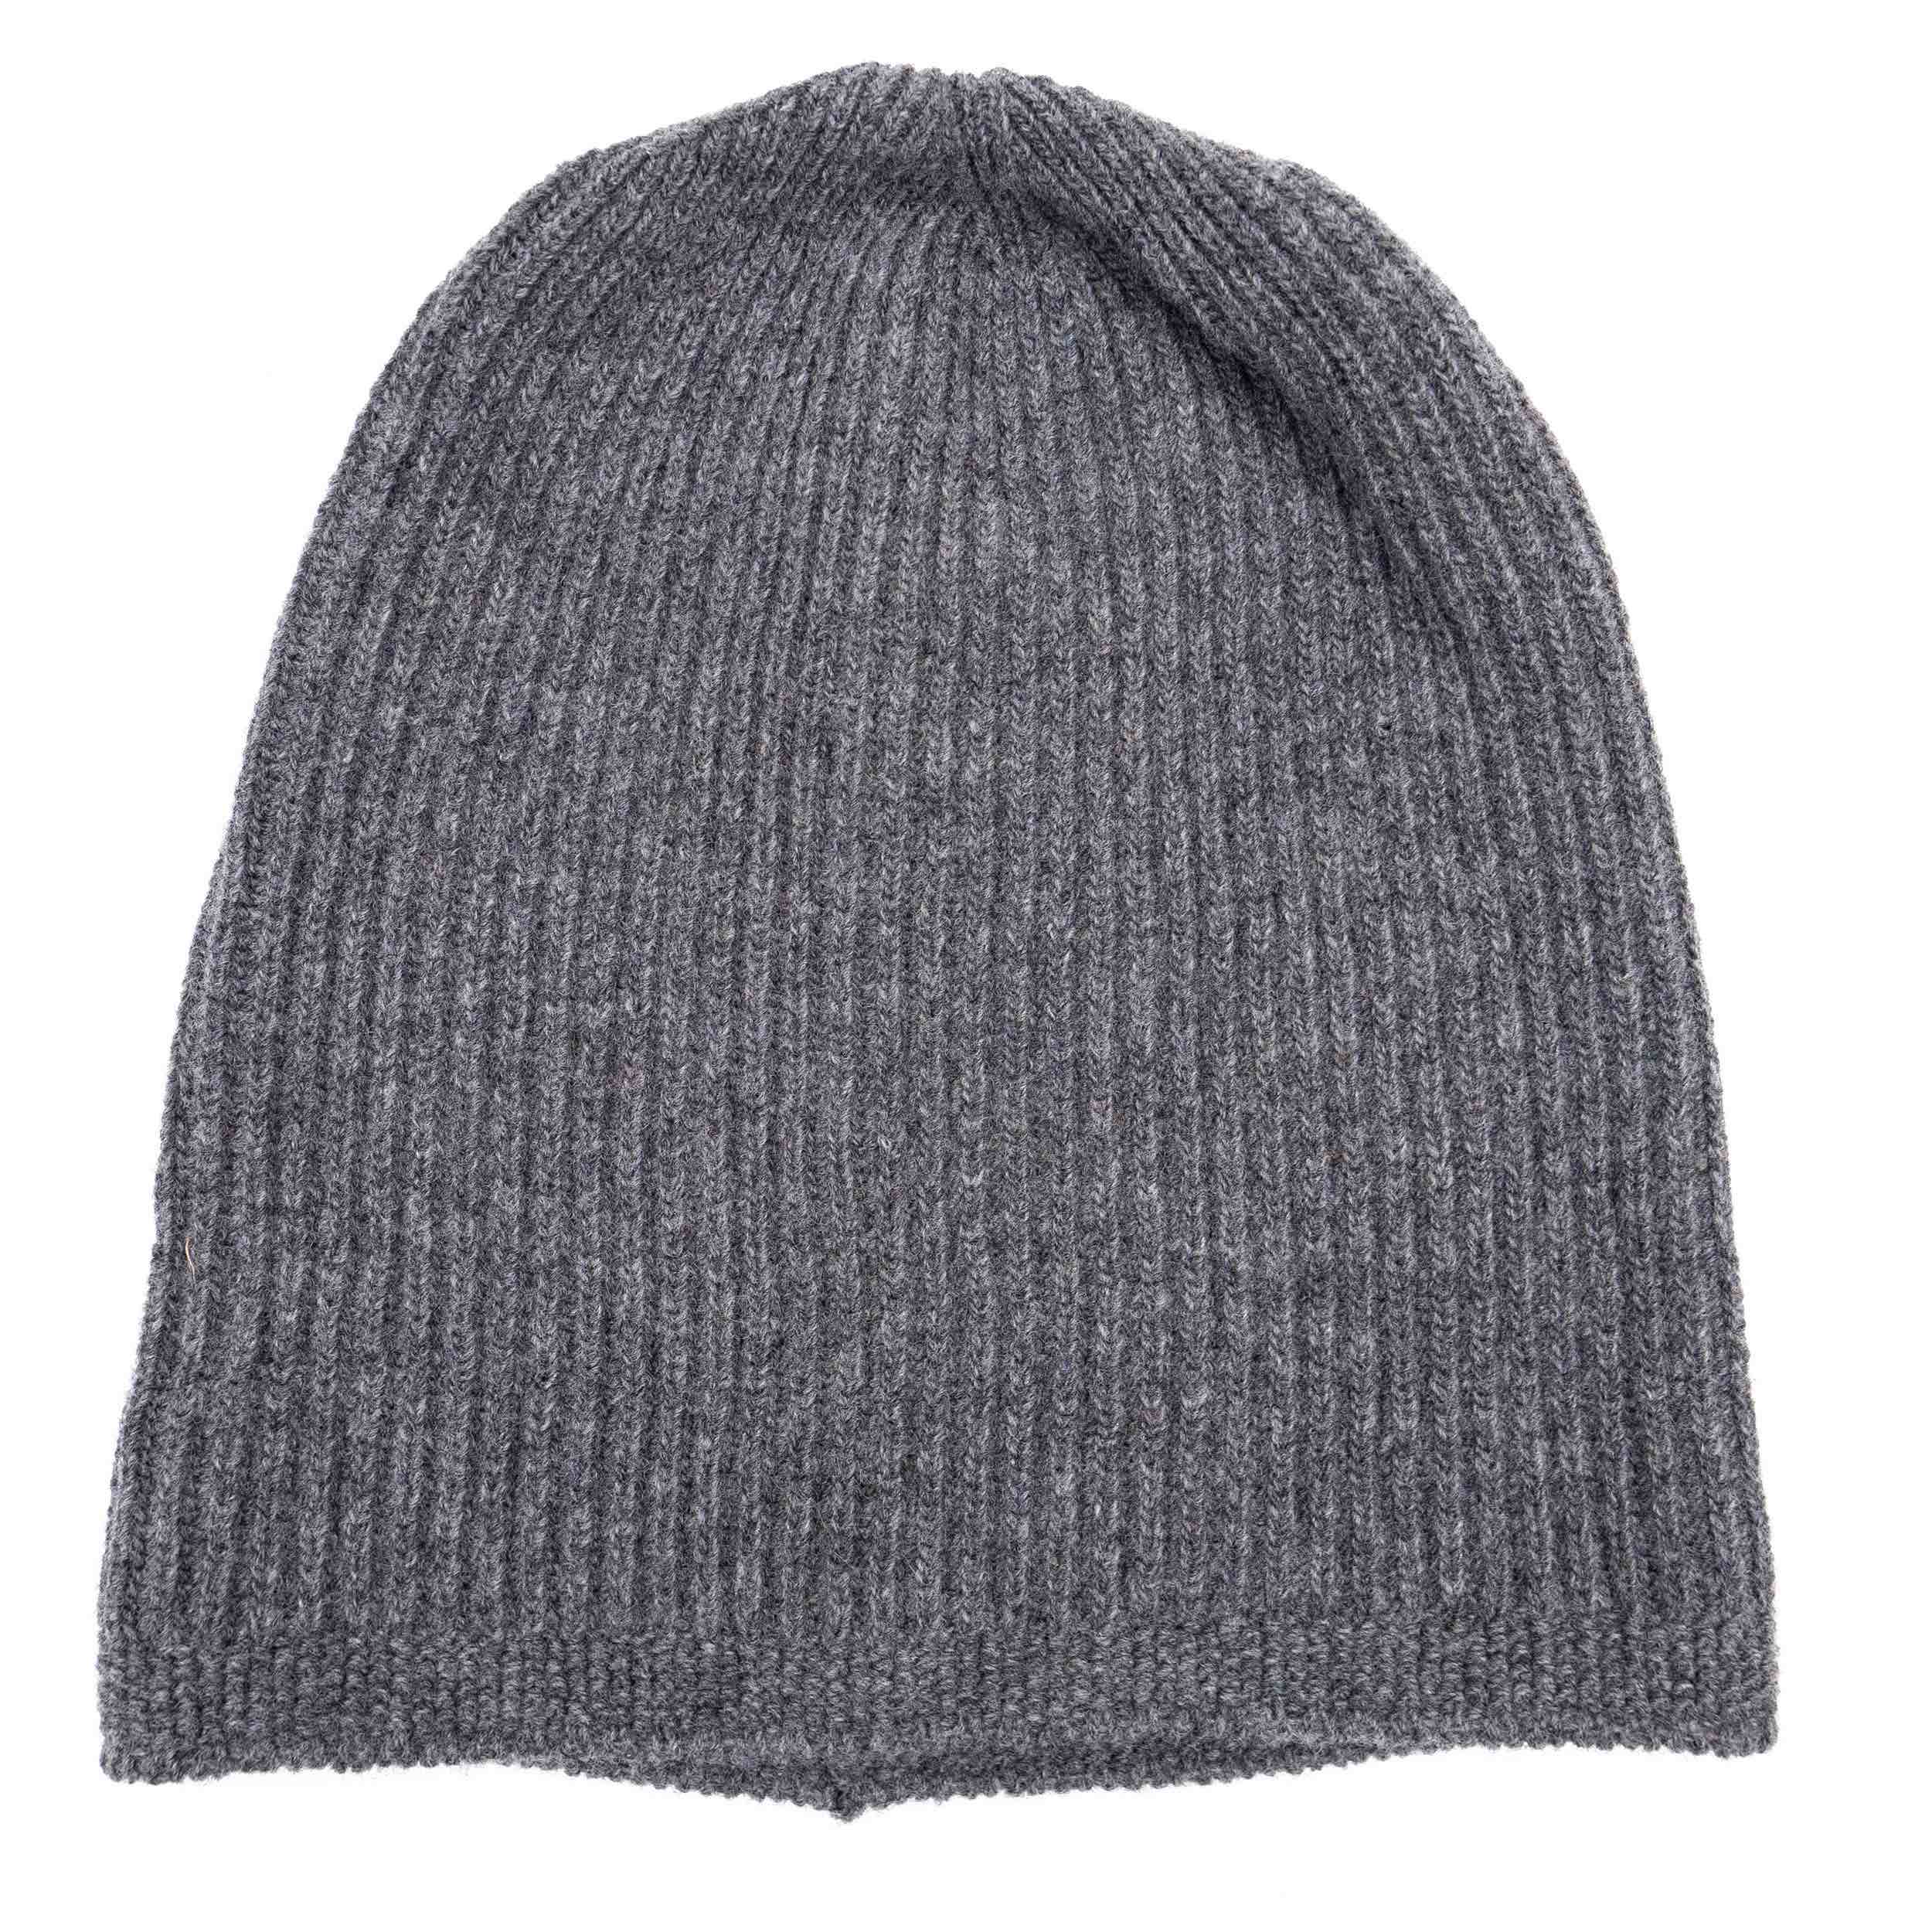 Carrier Company Wool Hat in Grey